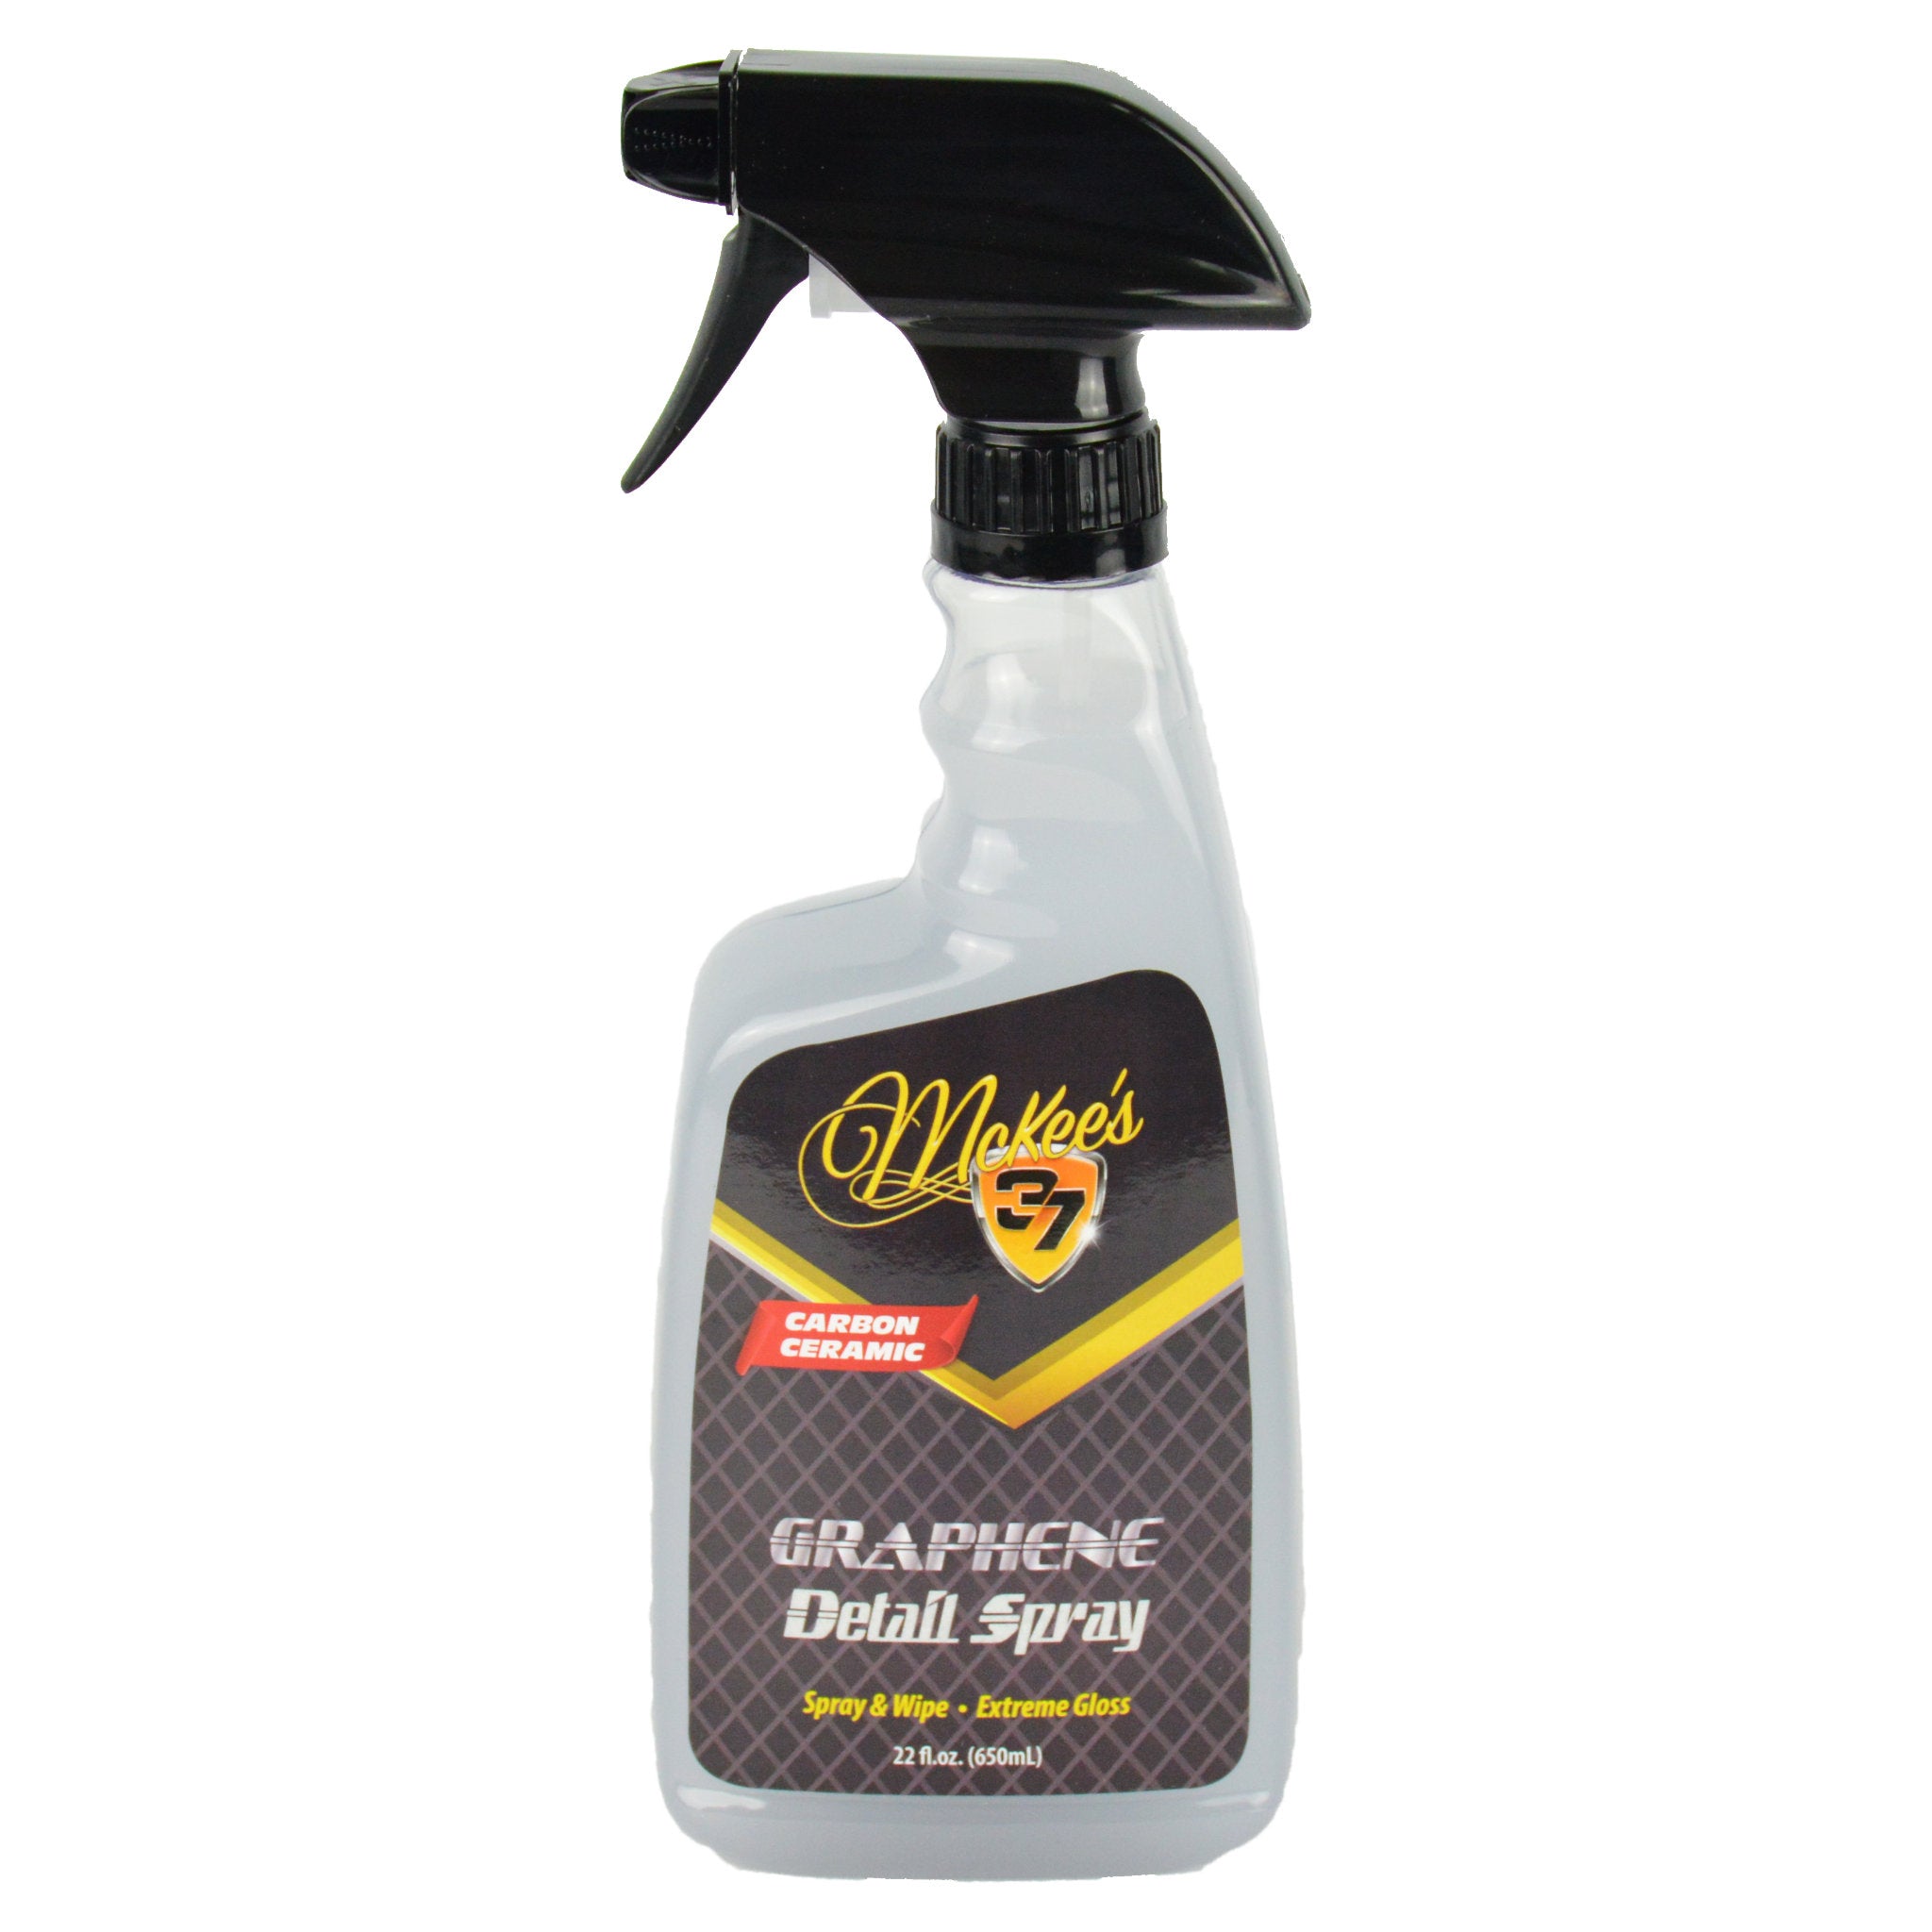 Spray Wax For Headlight Restoration 16 Fl Oz, Detailers, Cleaning and  Care, Chemical Product